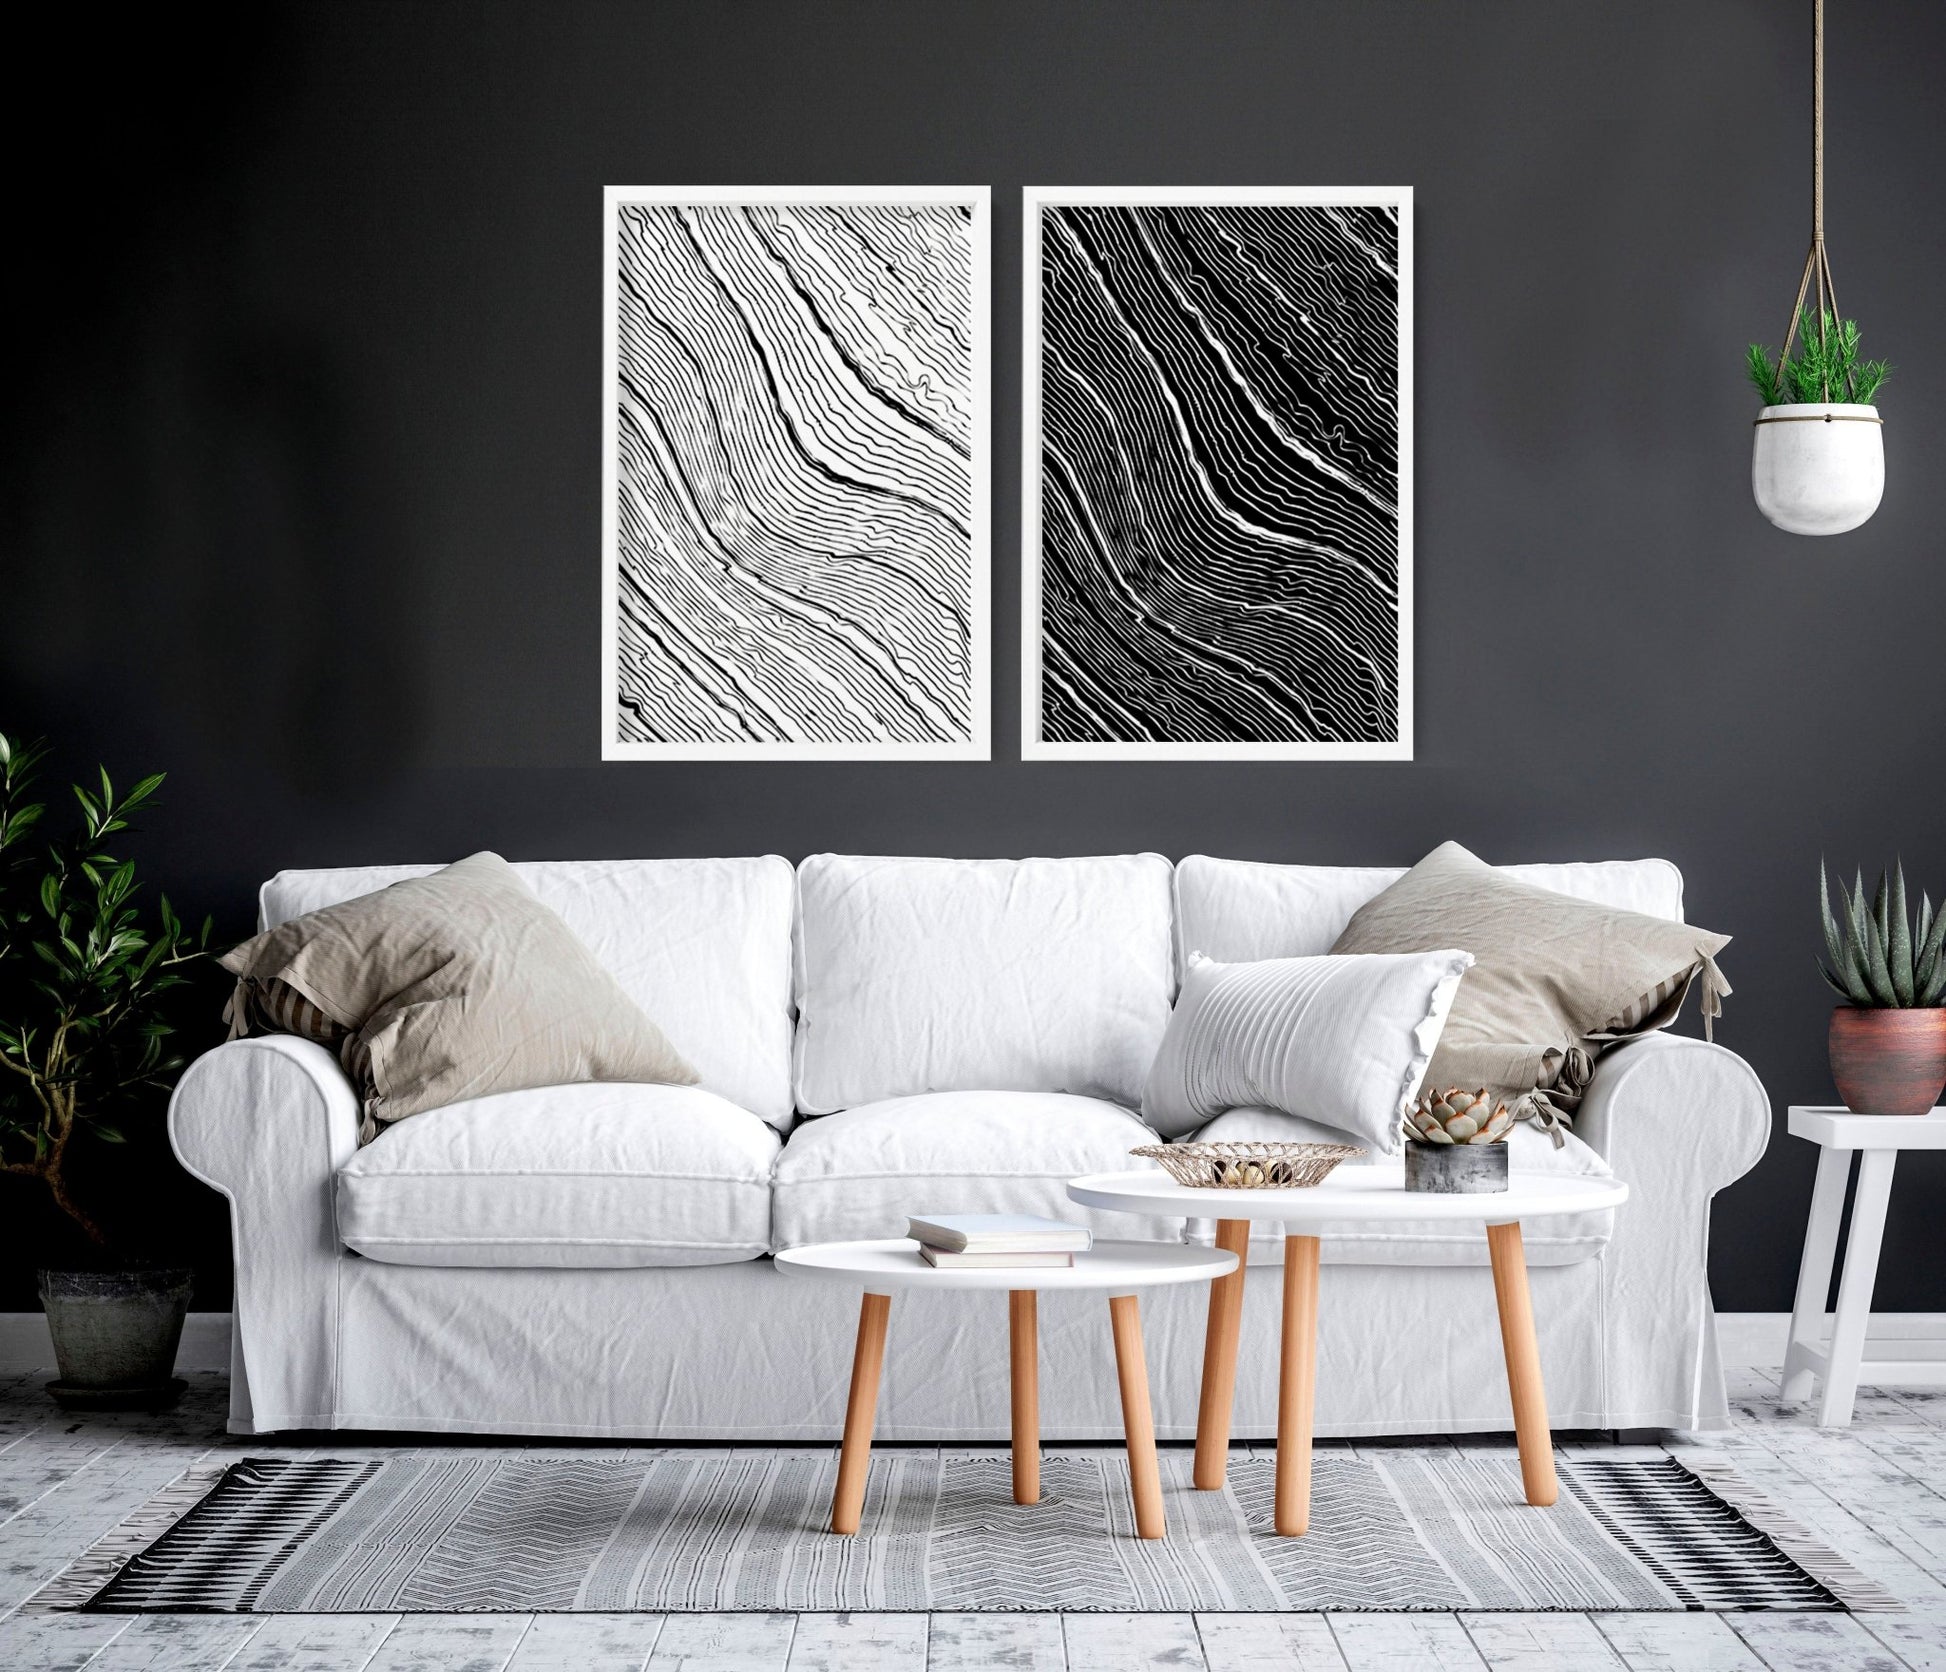 Black and white art wall | set of 2 wall art prints for living room - About Wall Art